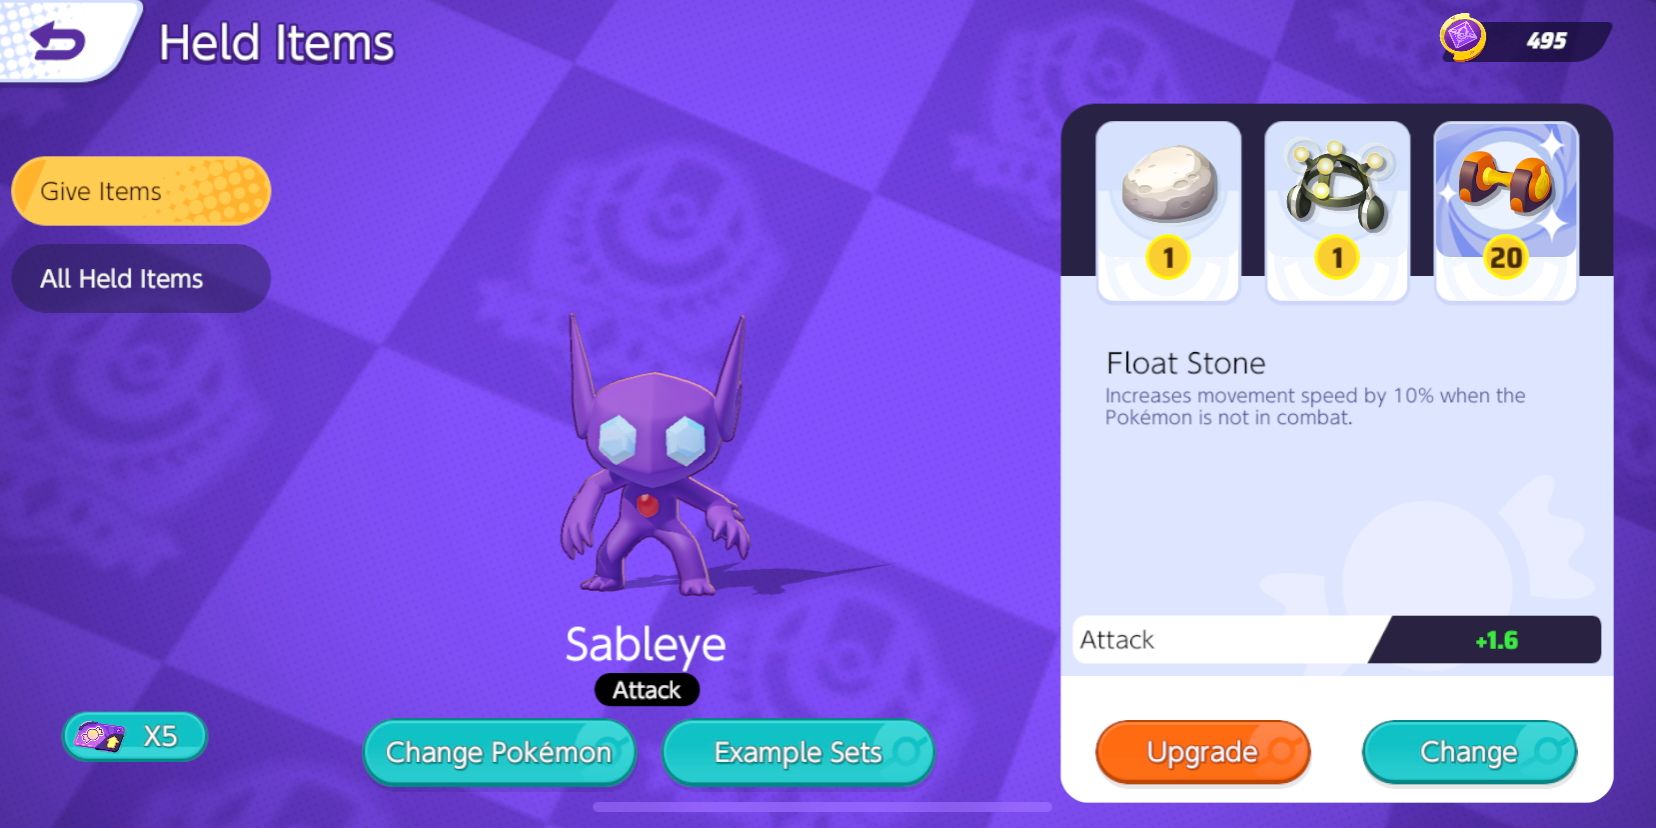 Sableye Held Item selection screen with Float Stone, Exp. Share, and Attack Weight chosen